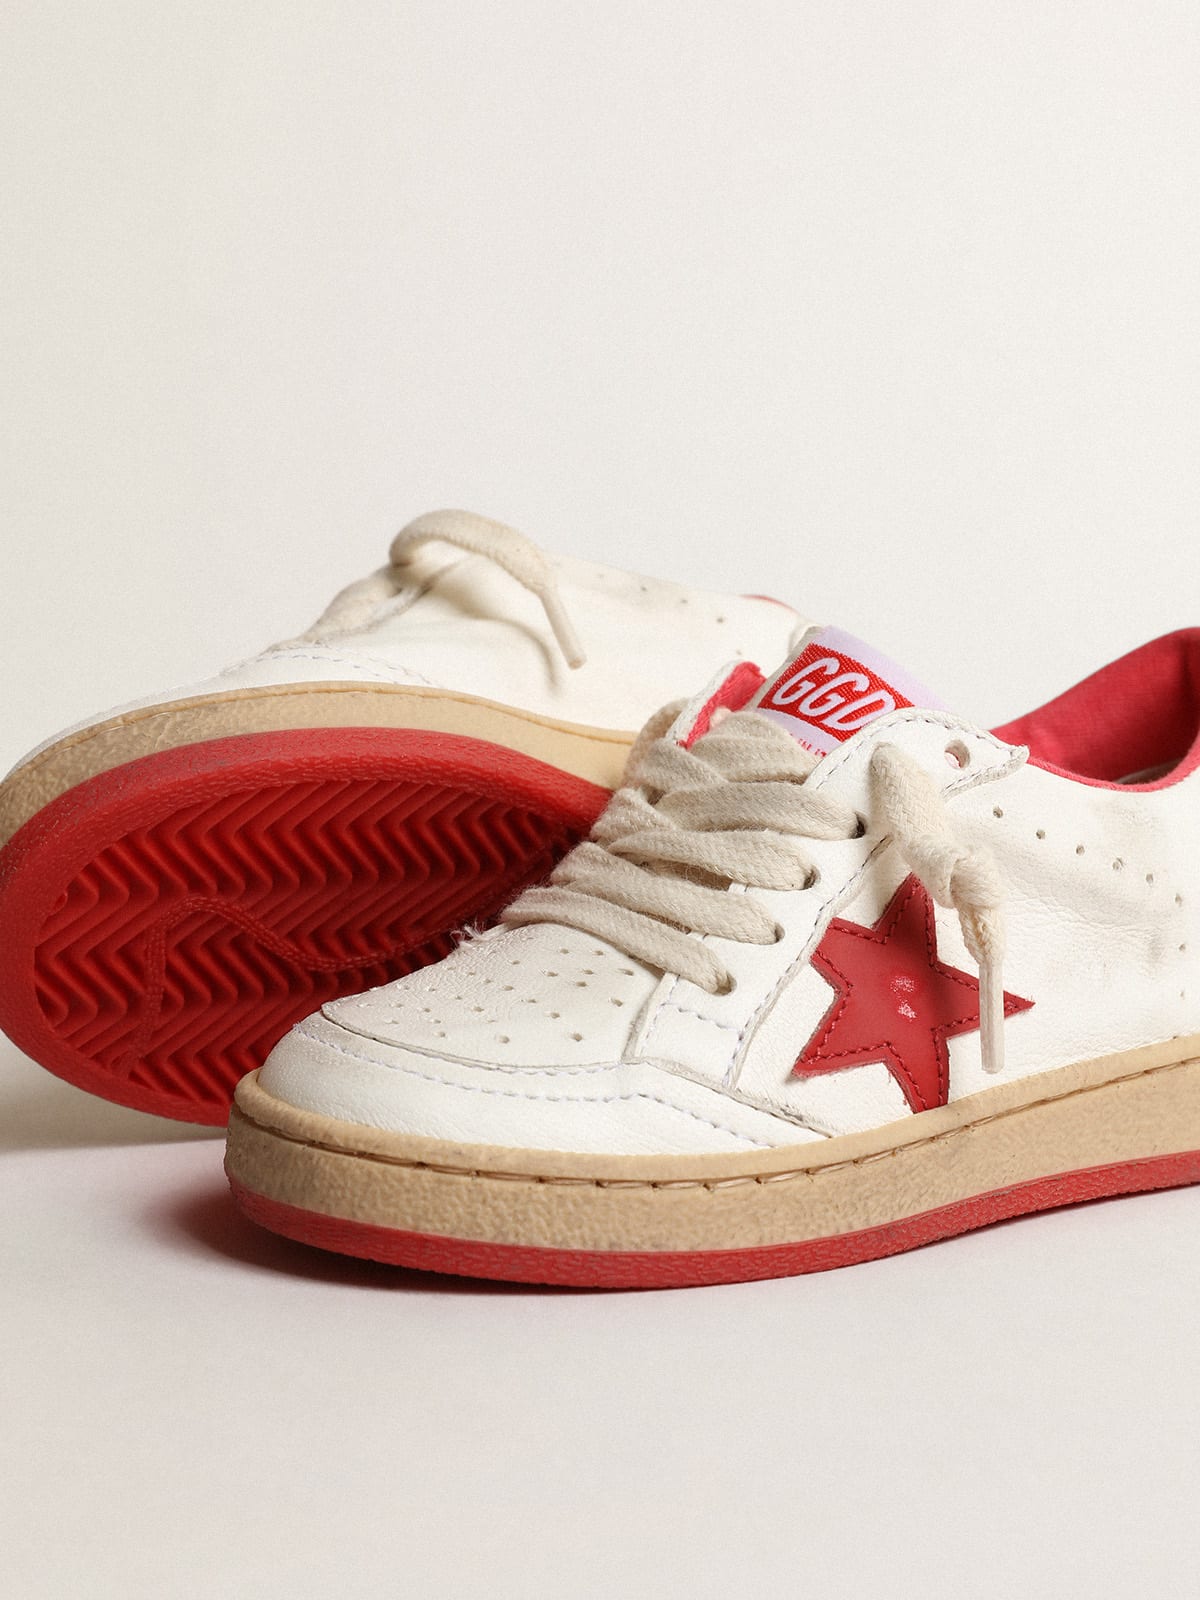 Golden Goose - Ball Star Junior in nappa with red leather star and heel tab in 